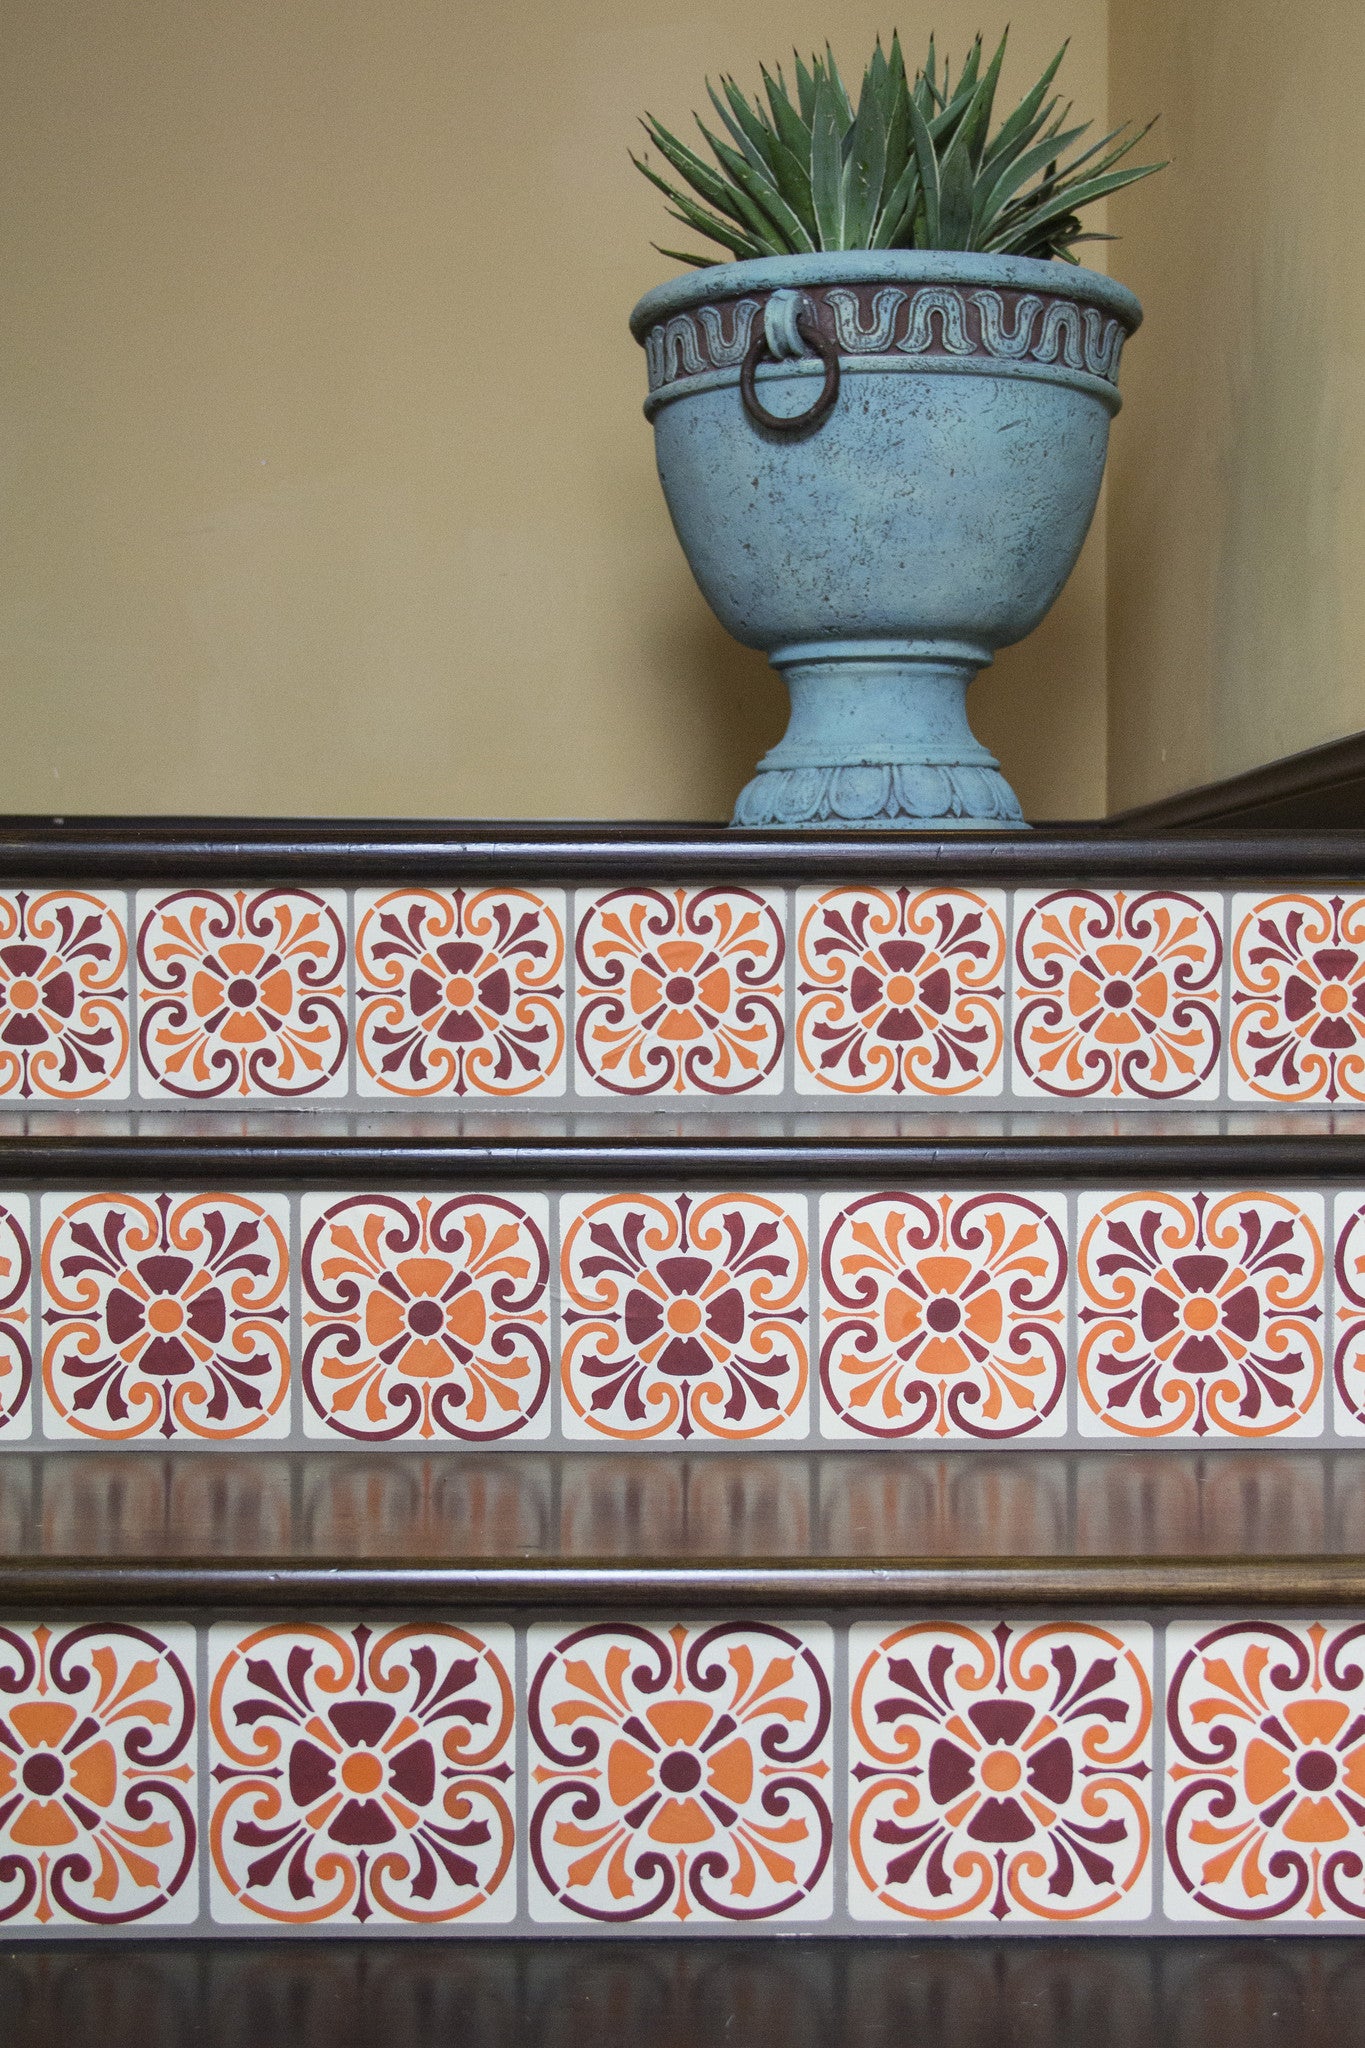 Italian and Spanish Stencils for Painting Tiled Stairs - Royal Design Studio